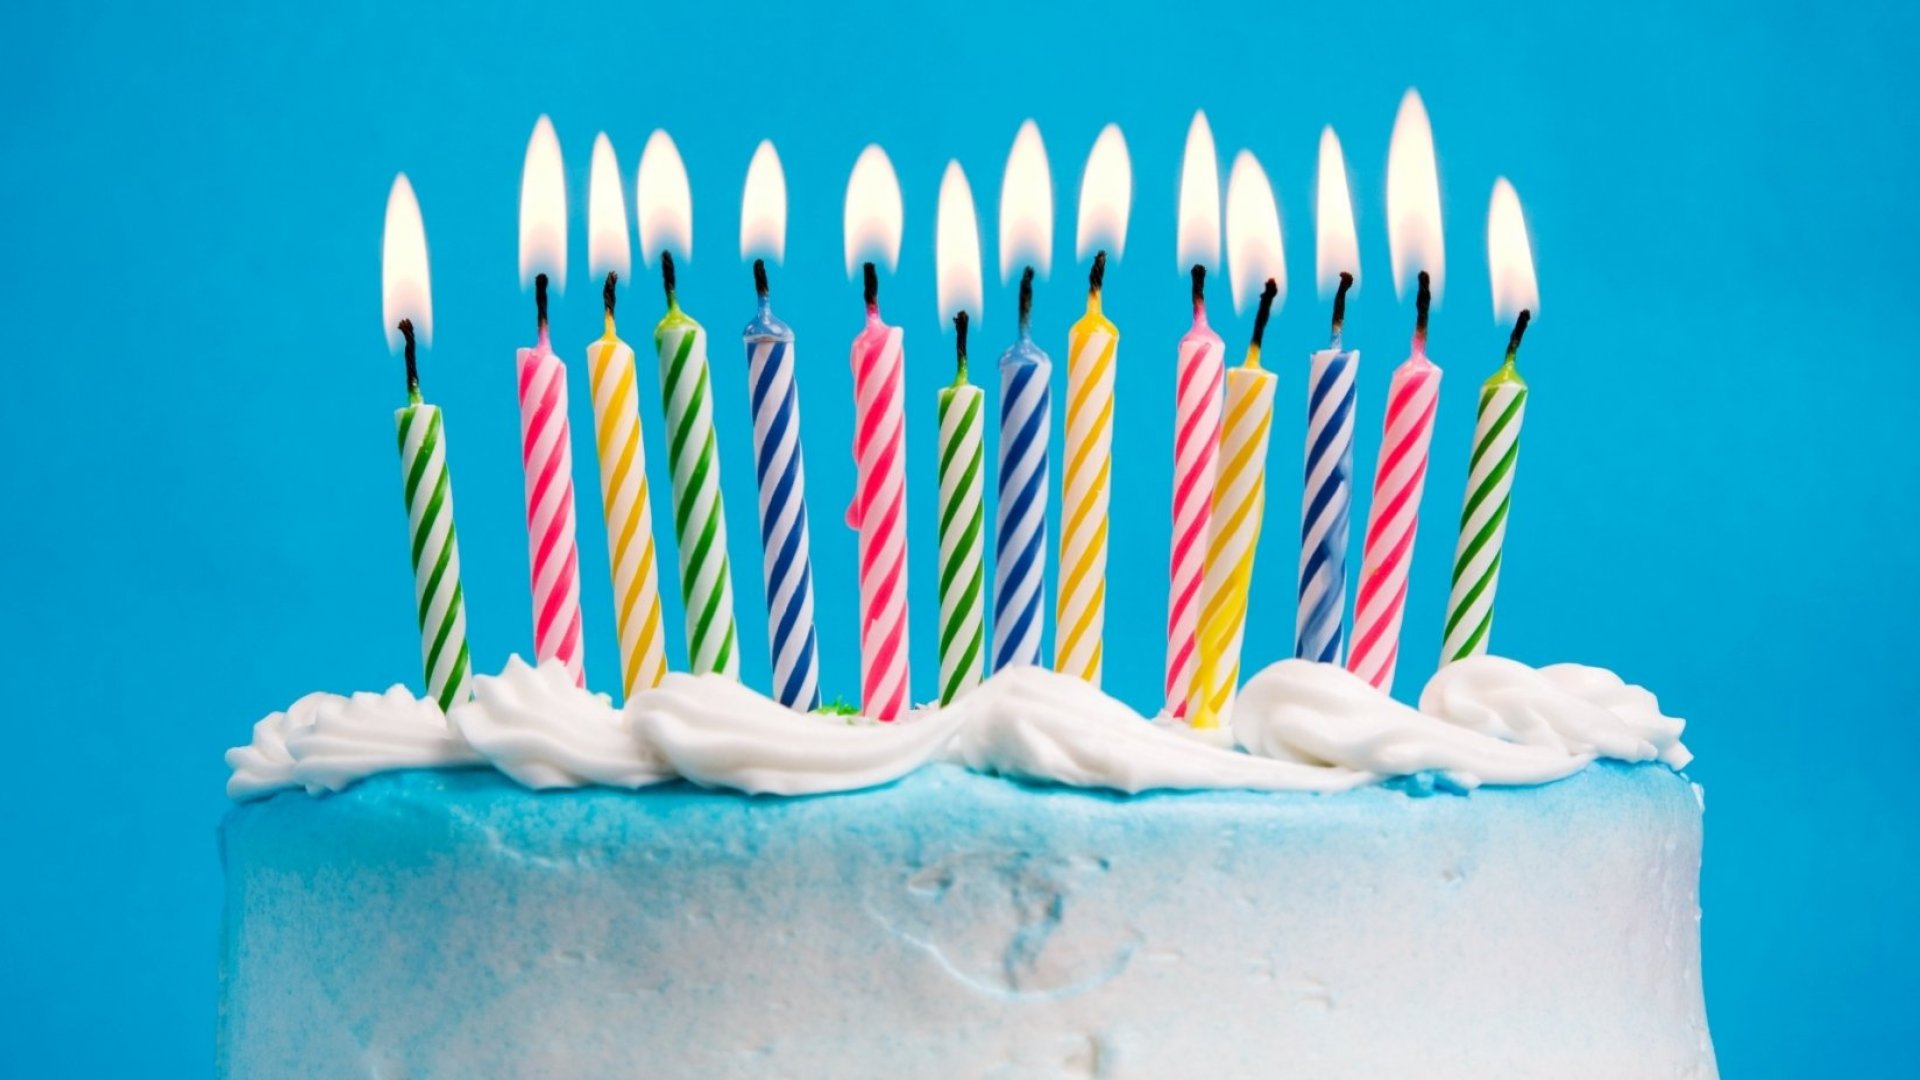 Top 10 Tips What to Do On Your Birthday - Getinfolist.com